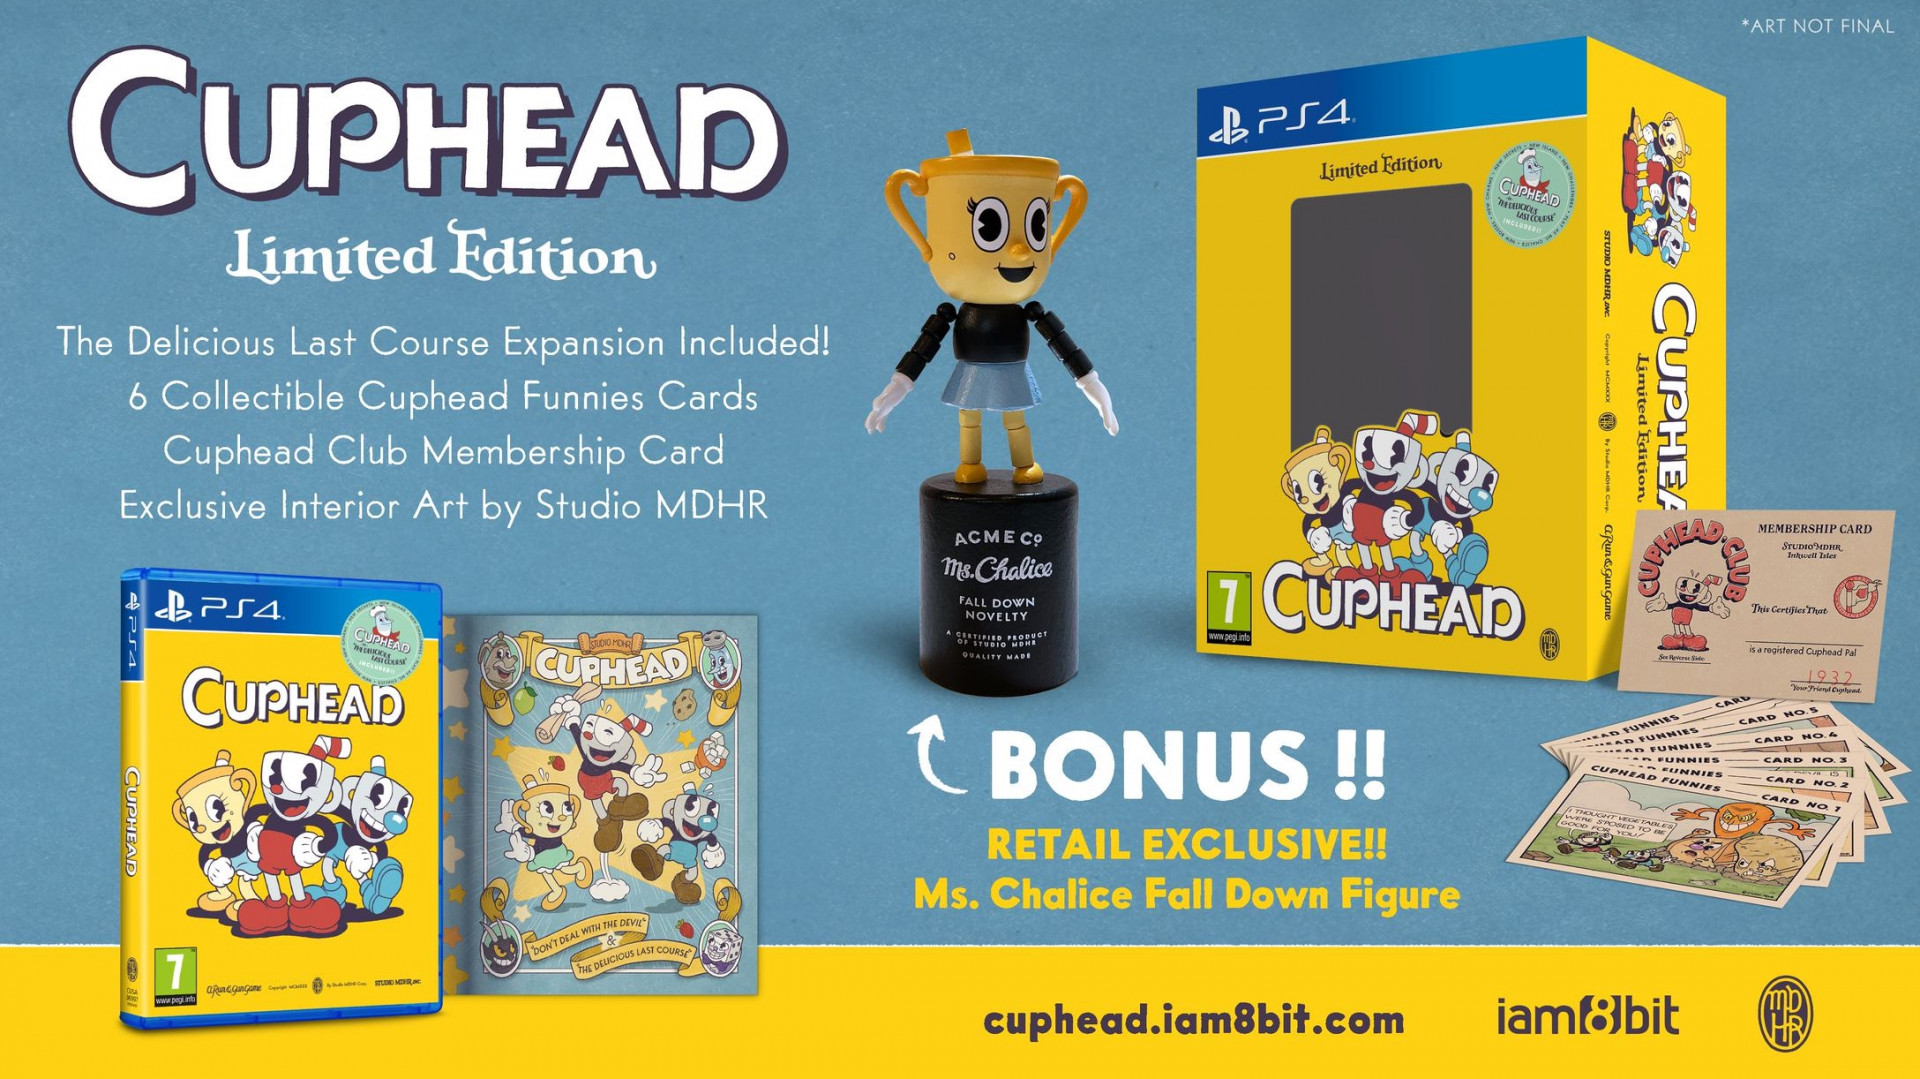 Cuphead - Limited Edition (PS4), Plaion